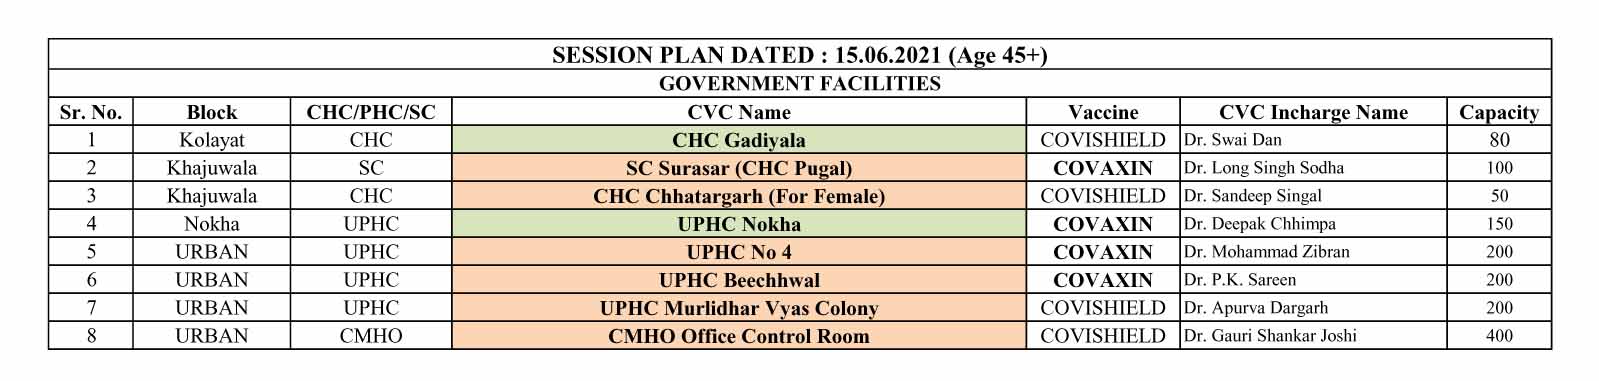 45 Session Plan Dated 15.06.2021 copy